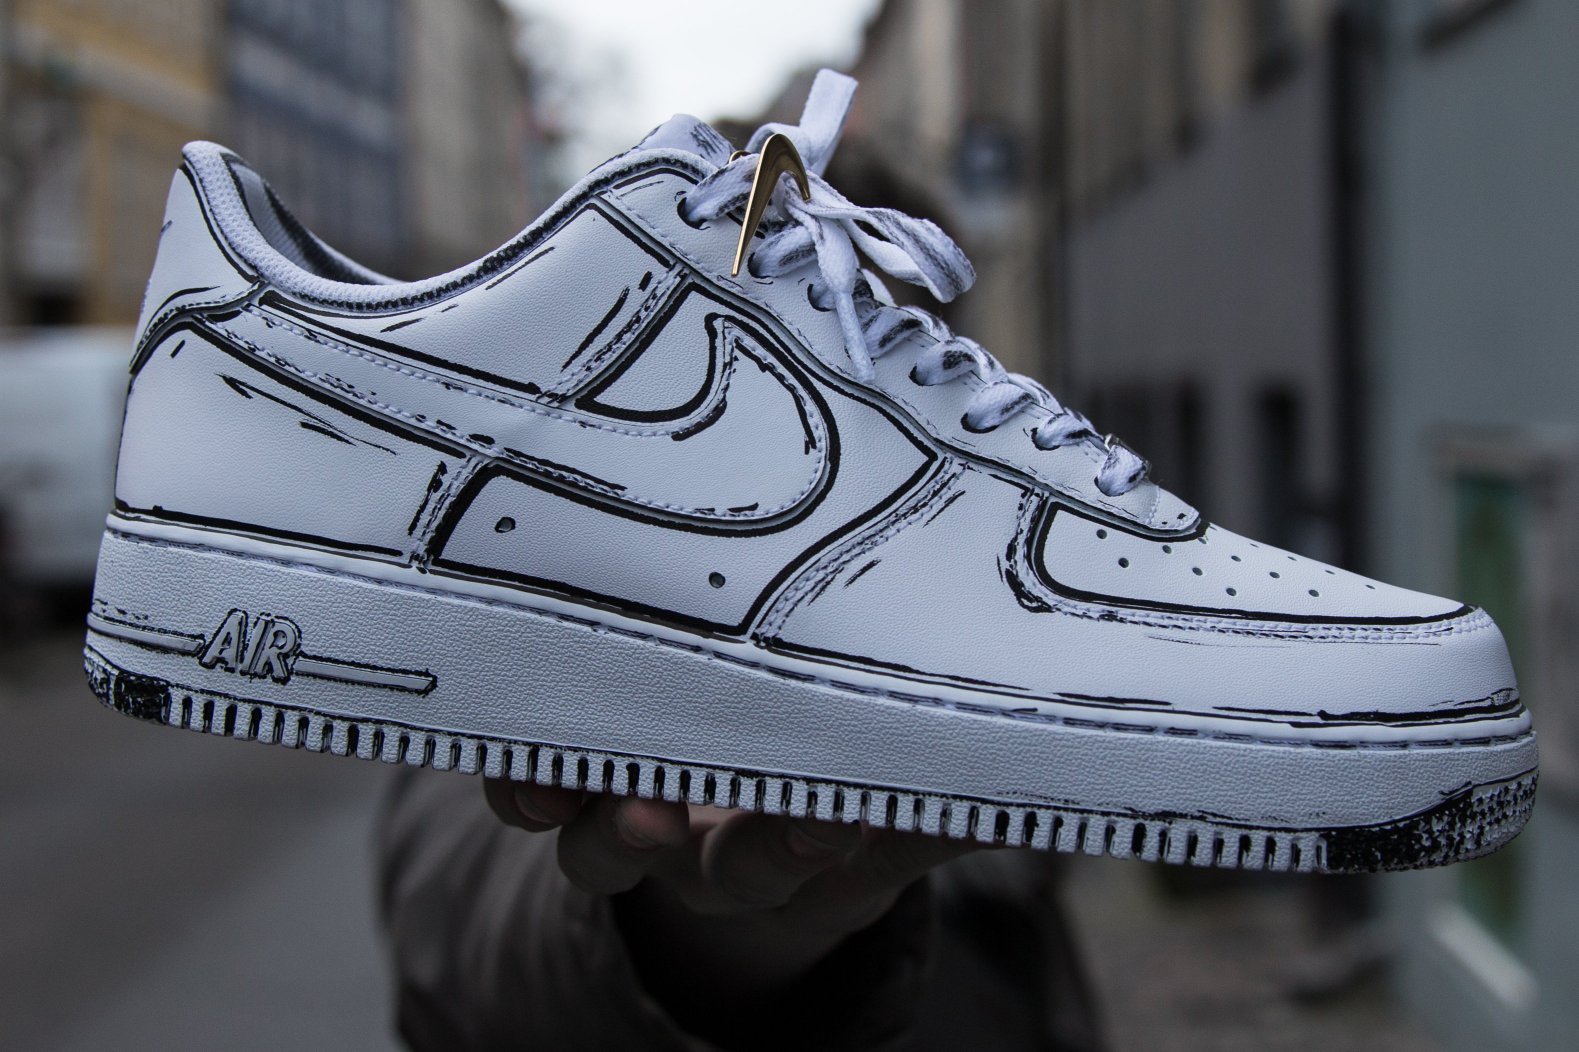 KarlsKicks - Another look at the custom painted lv Air force 1